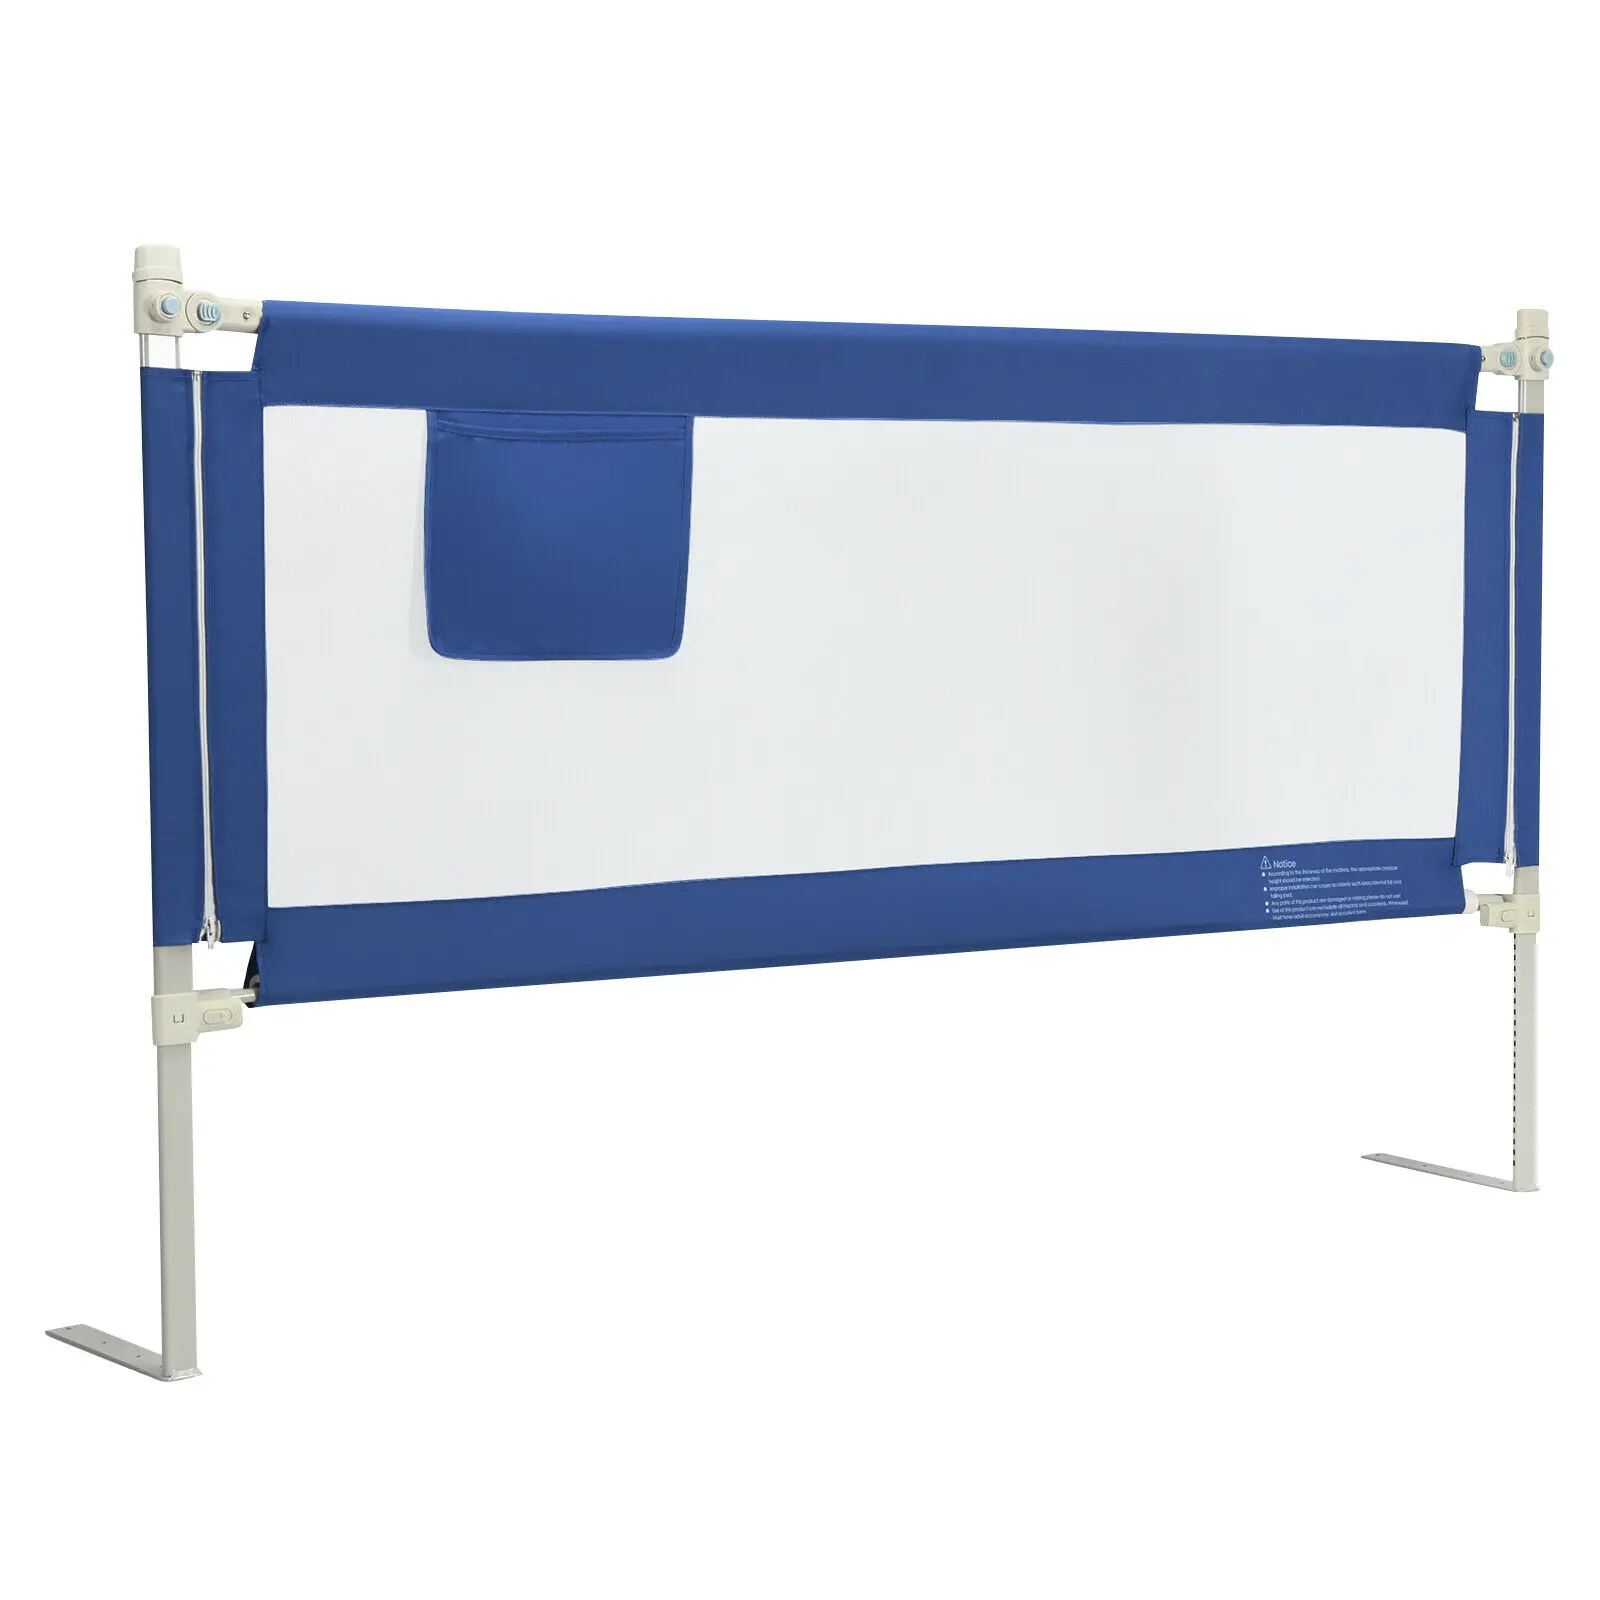 

69.5" Bed Rails for Toddlers Vertical Lifting Baby Bed Rail Guard with Lock Blue BS10004BL